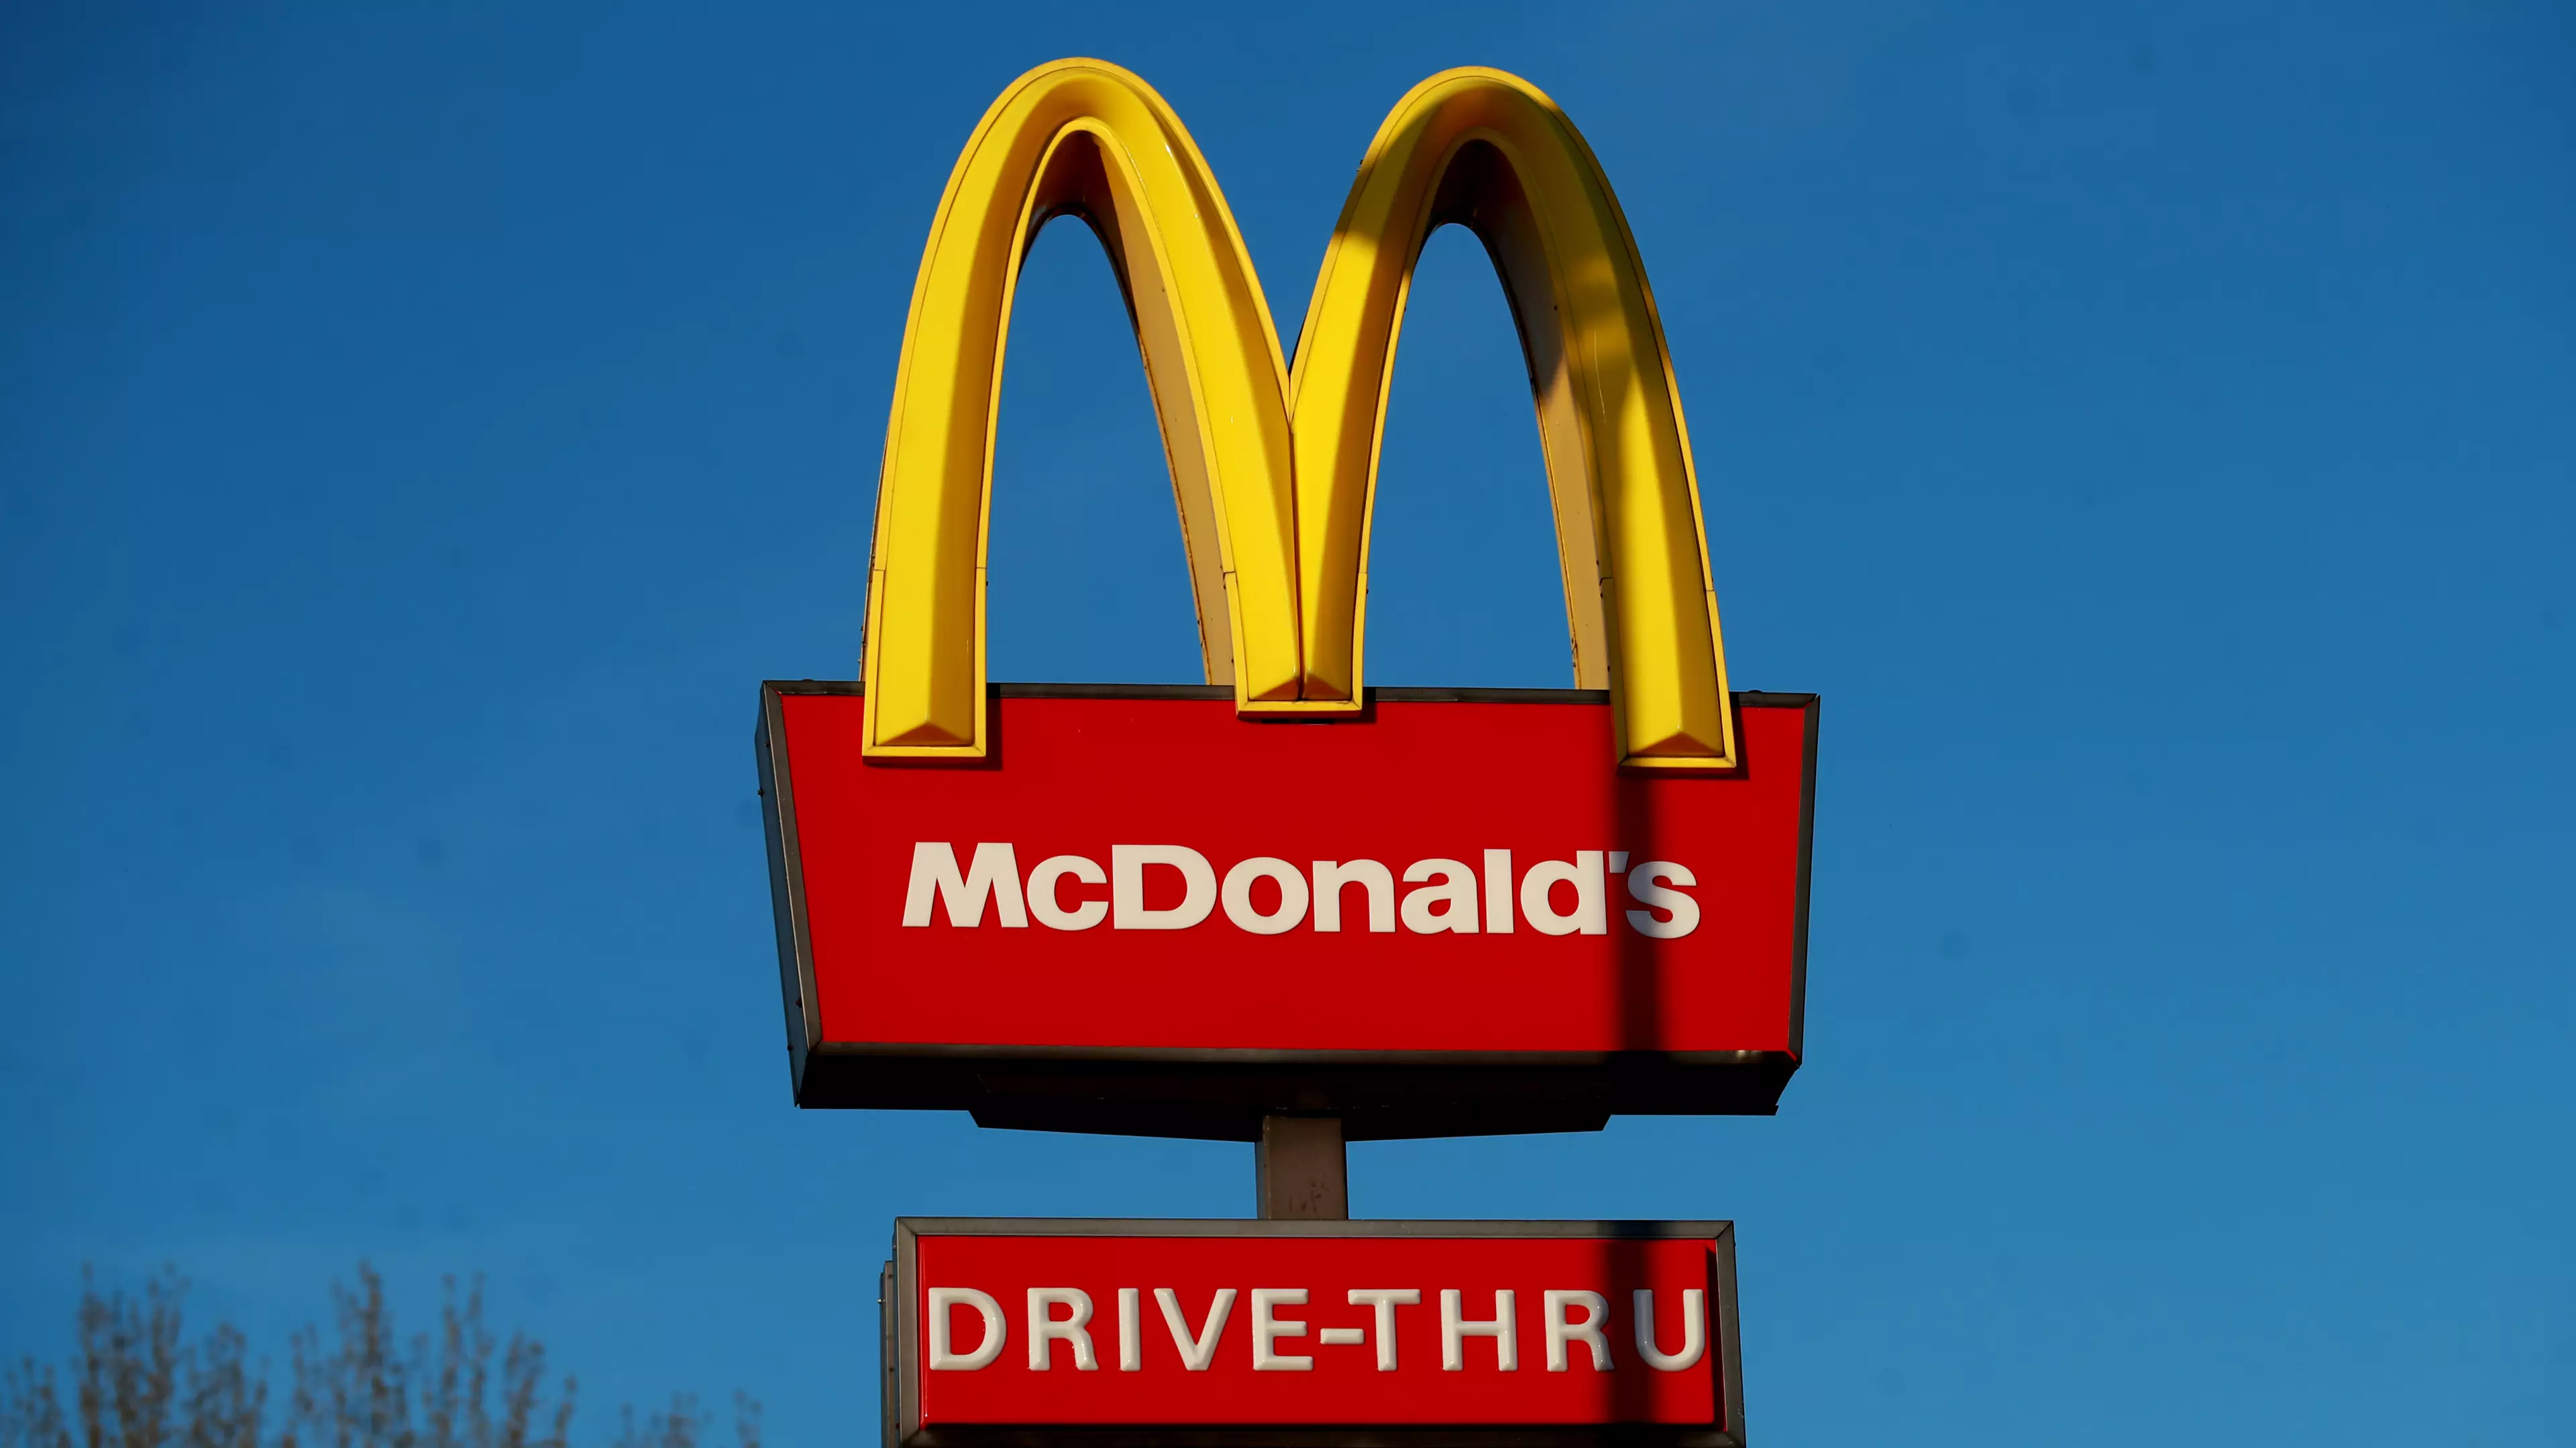 McDonald's To Start Serving Breakfast In 42 Branches